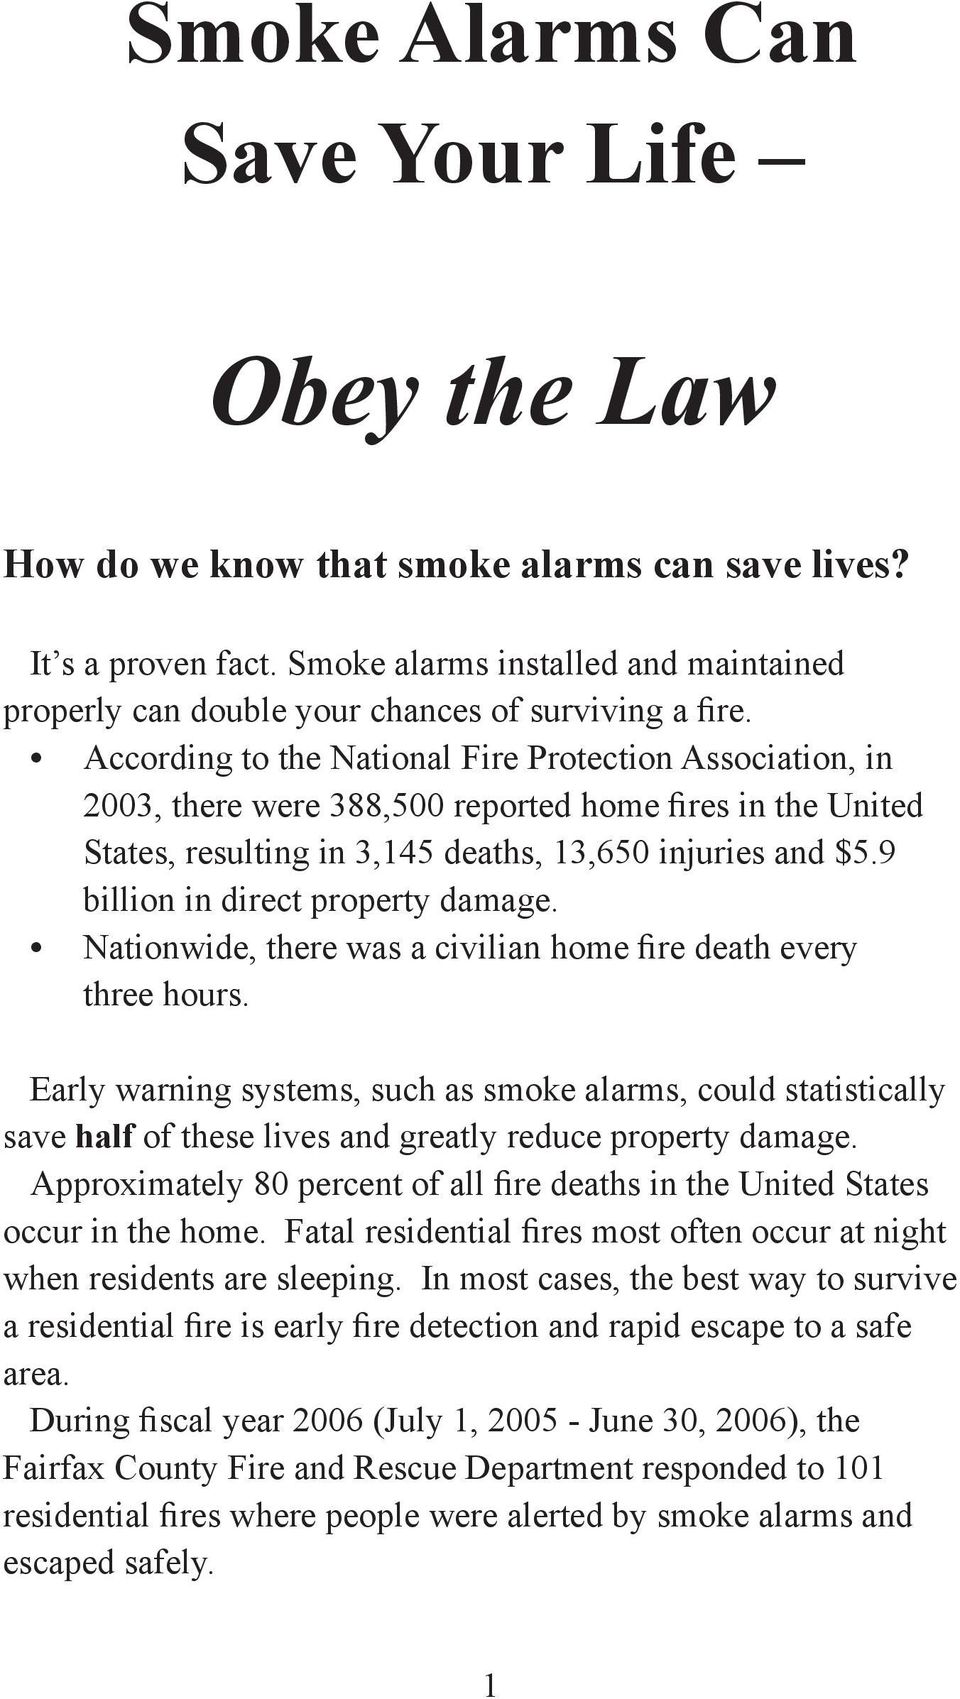 According to the National Fire Protection Association, in 2003, there were 388,500 reported home fires in the United States, resulting in 3,145 deaths, 13,650 injuries and $5.